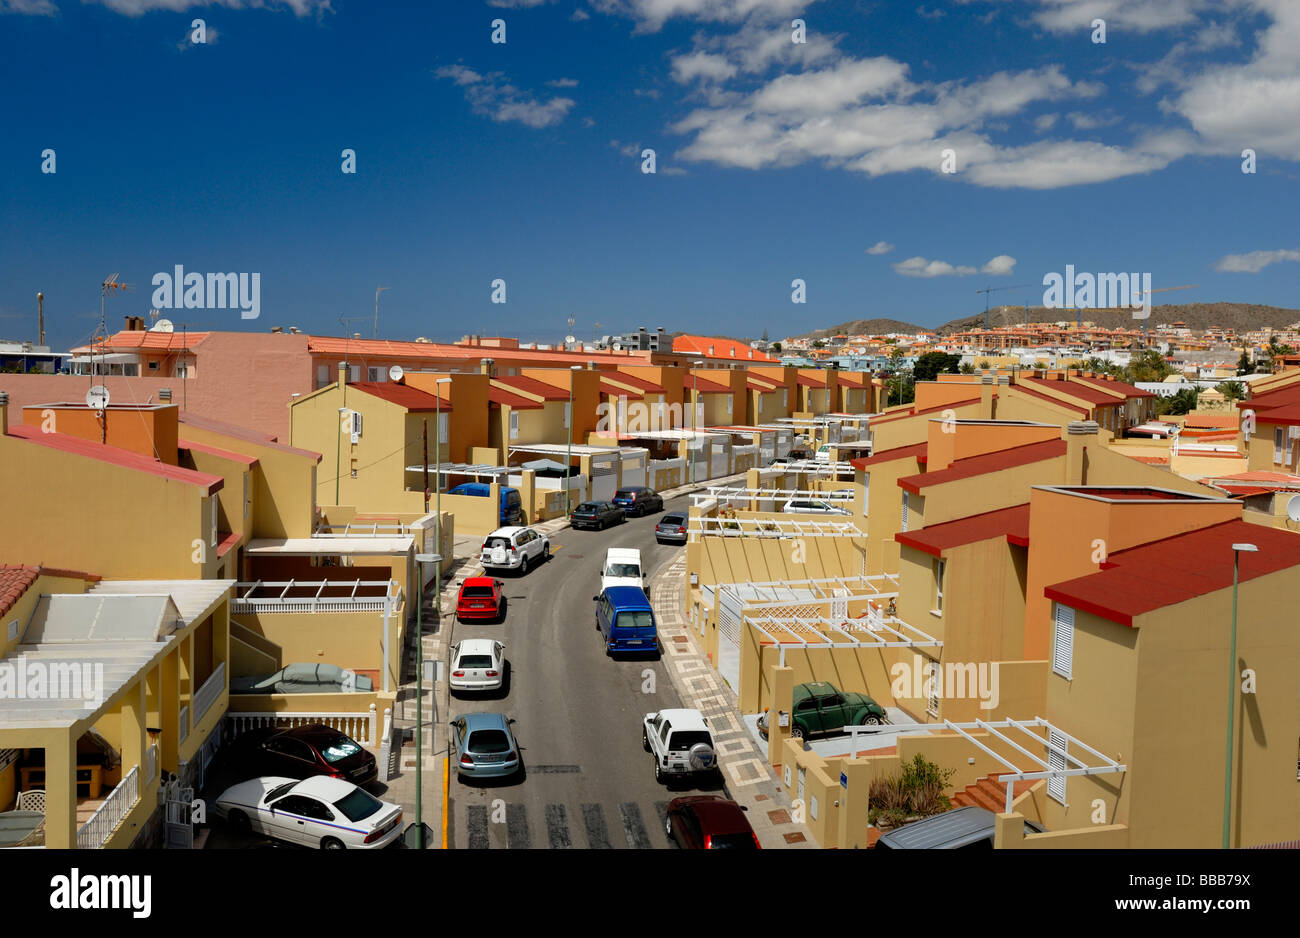 The new apartments in a small coastal village of Arguineguin, Gran Canaria, Canary Islands, Spain, Europe. Stock Photo